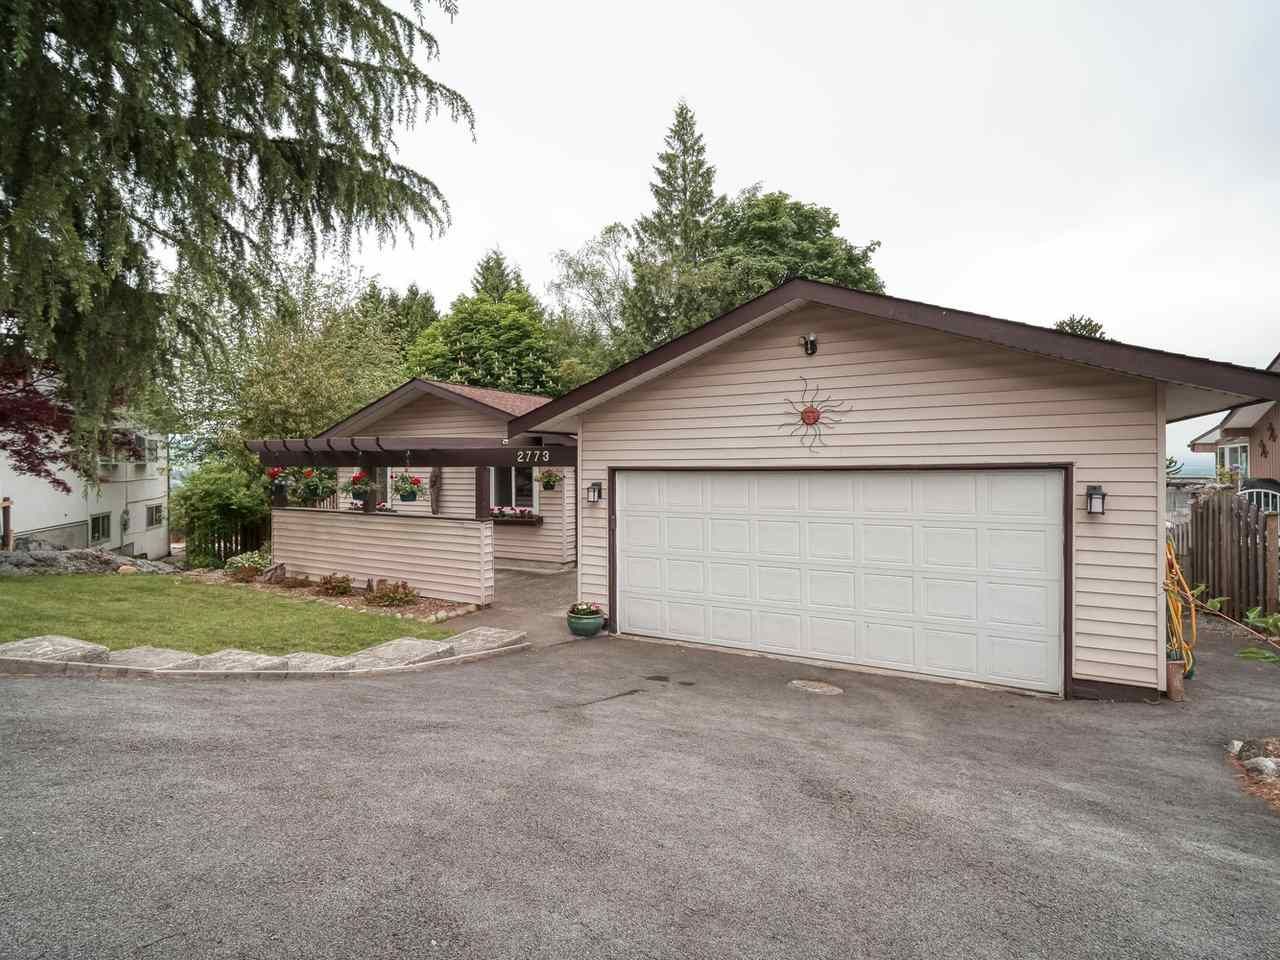 Main Photo: 2773 DAYBREAK Avenue in Coquitlam: Ranch Park House for sale : MLS®# R2457912